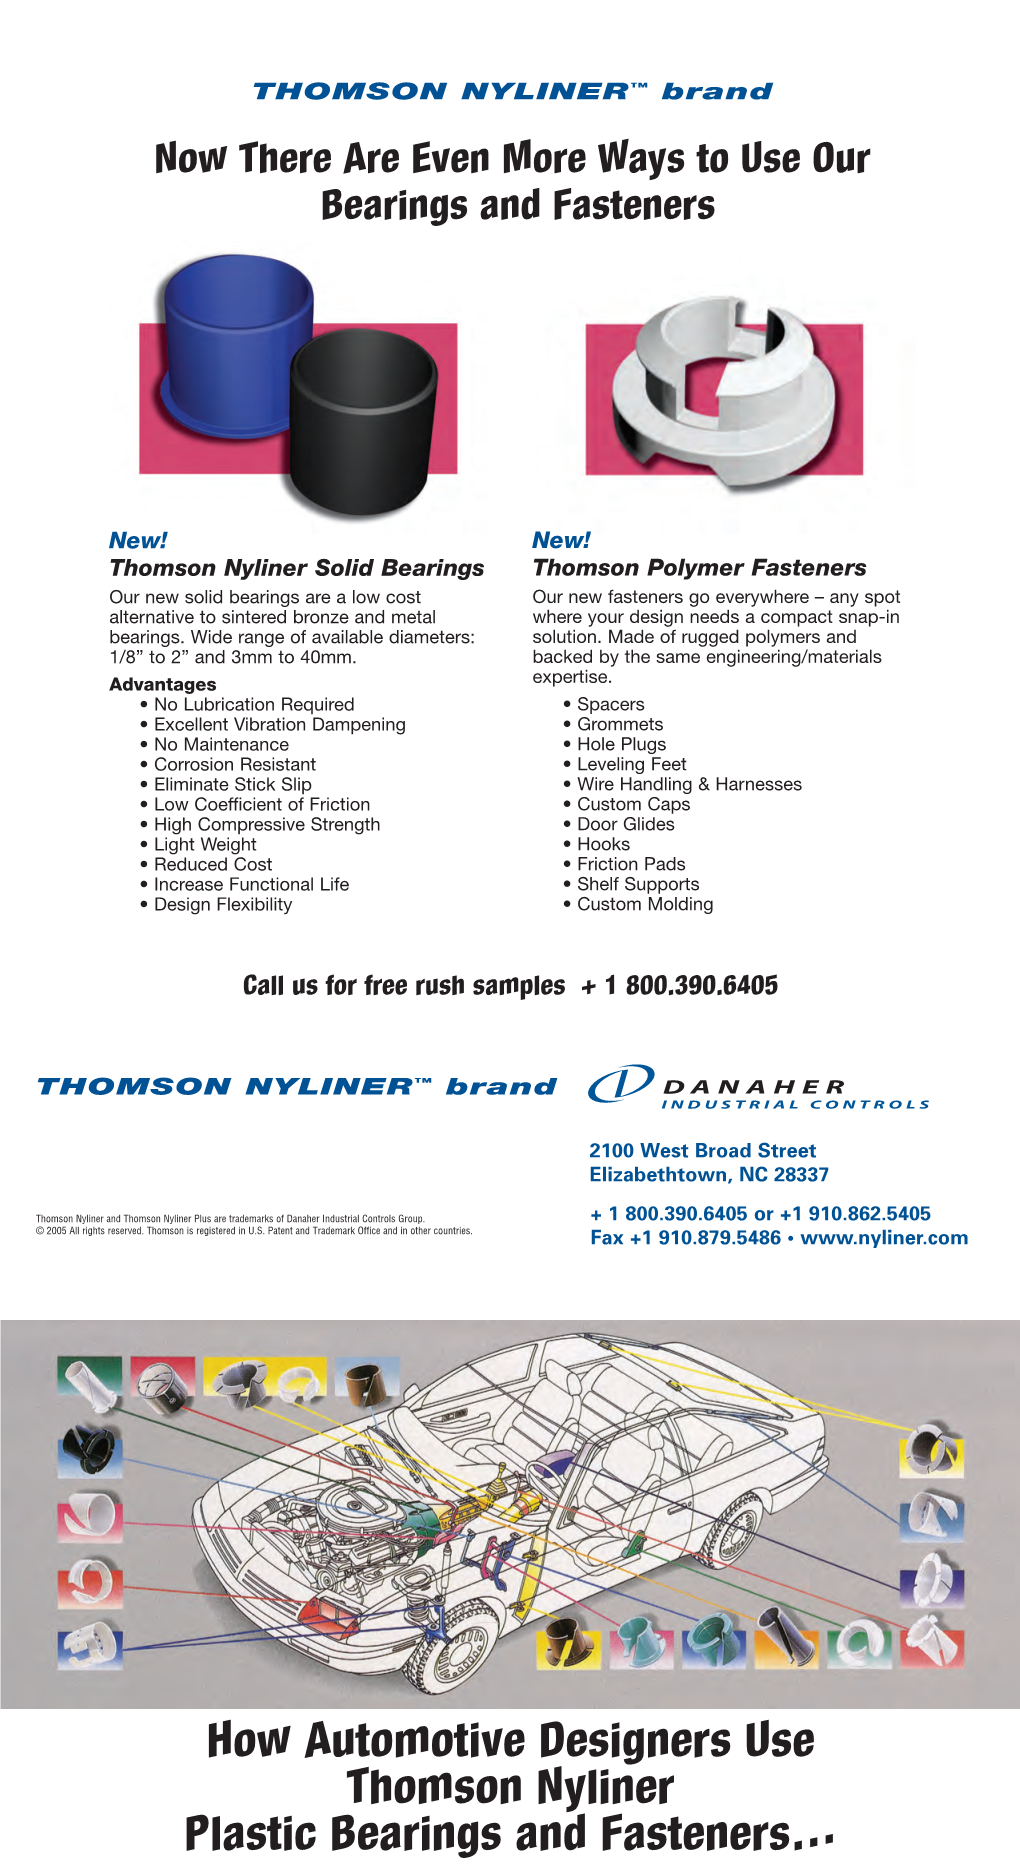 How Automotive Designers Use Thomson Nyliner Plastic Bearings and Fasteners… Thomson Nyliner™ Bearings and Thomson Nyliner Plus™ Bearings